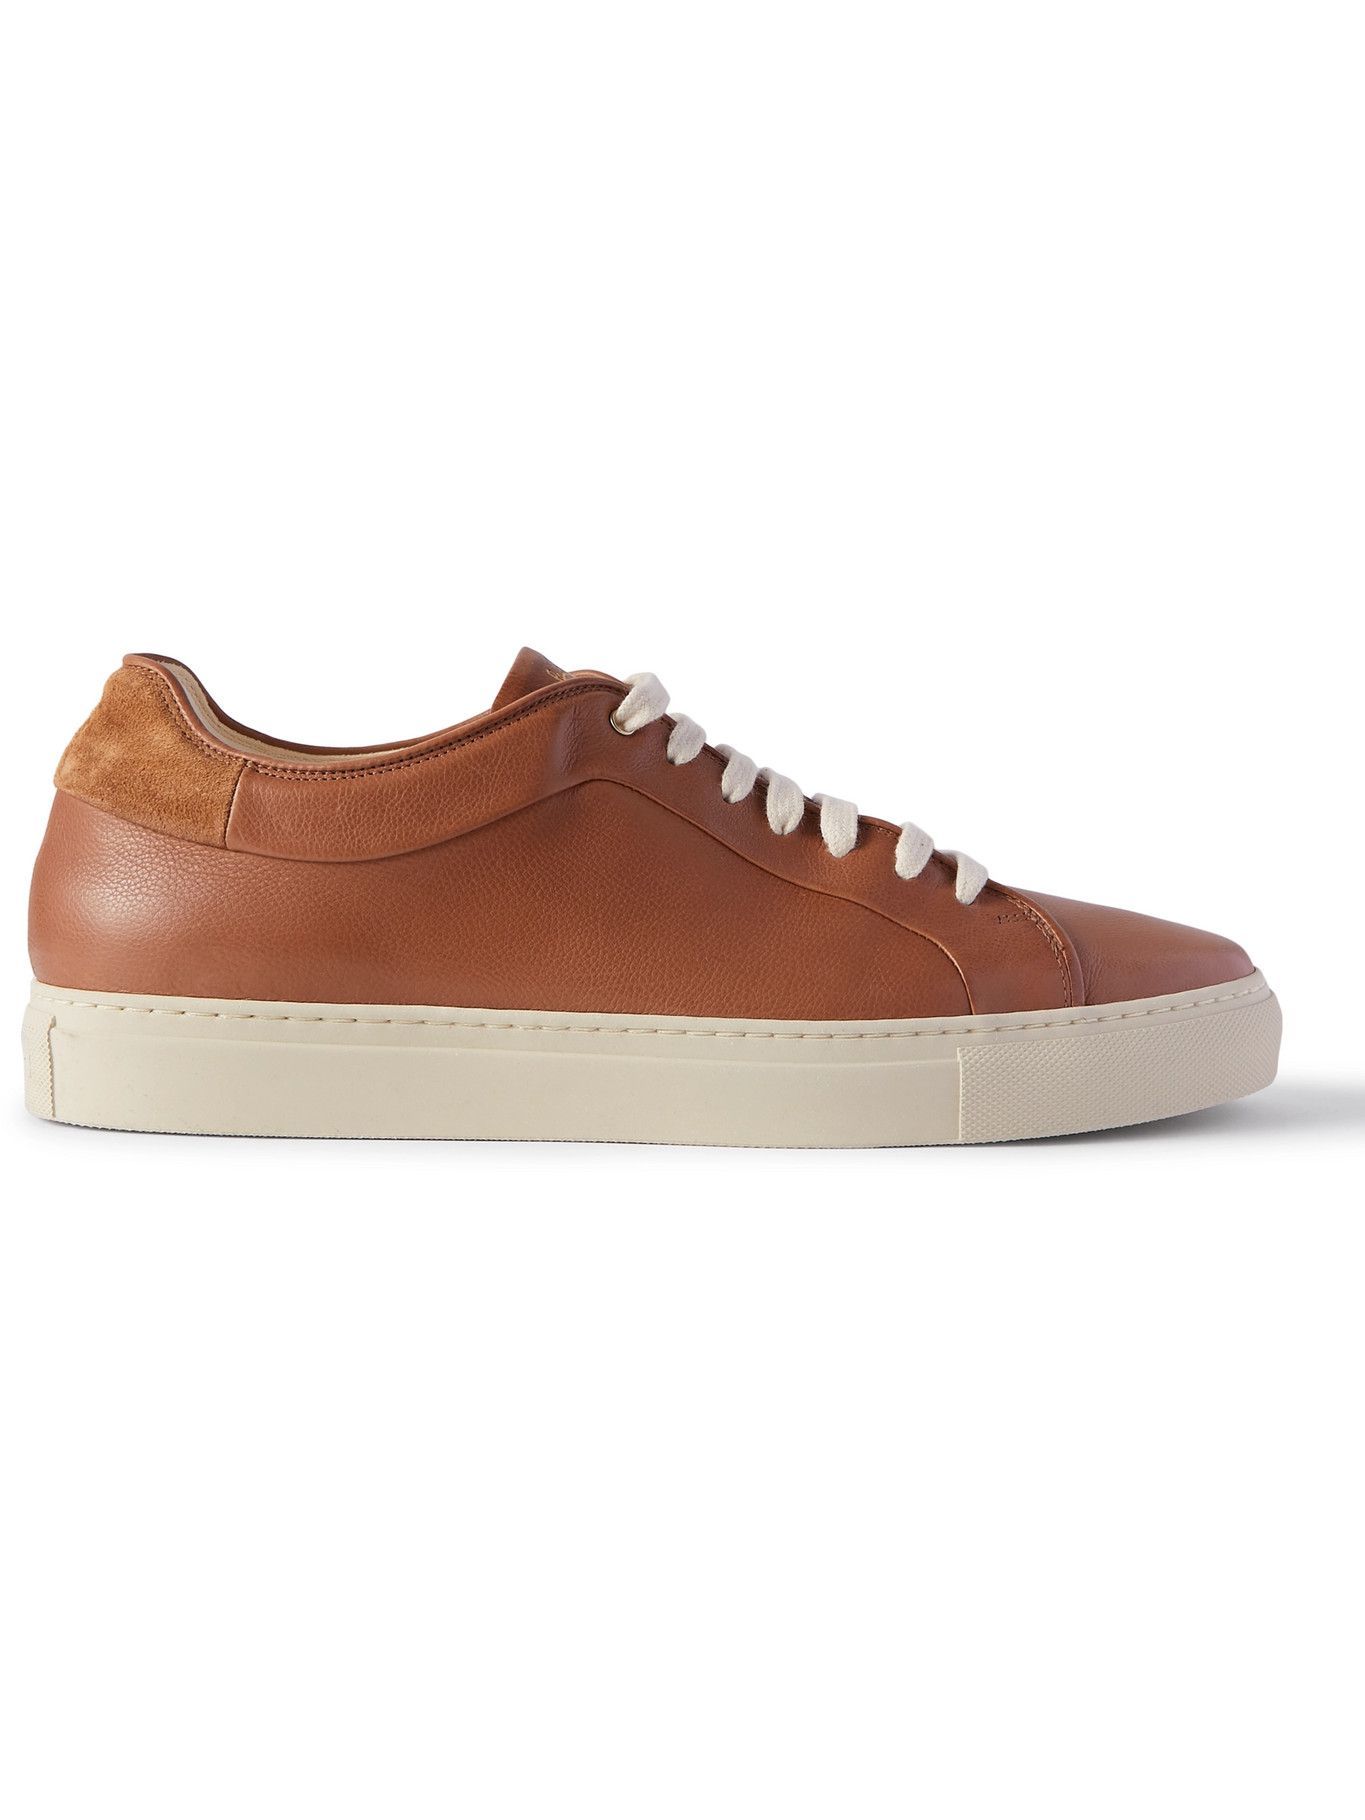 Paul Smith - Basso Suede-Trimmed Full-Grain Leather Sneakers - Brown ...